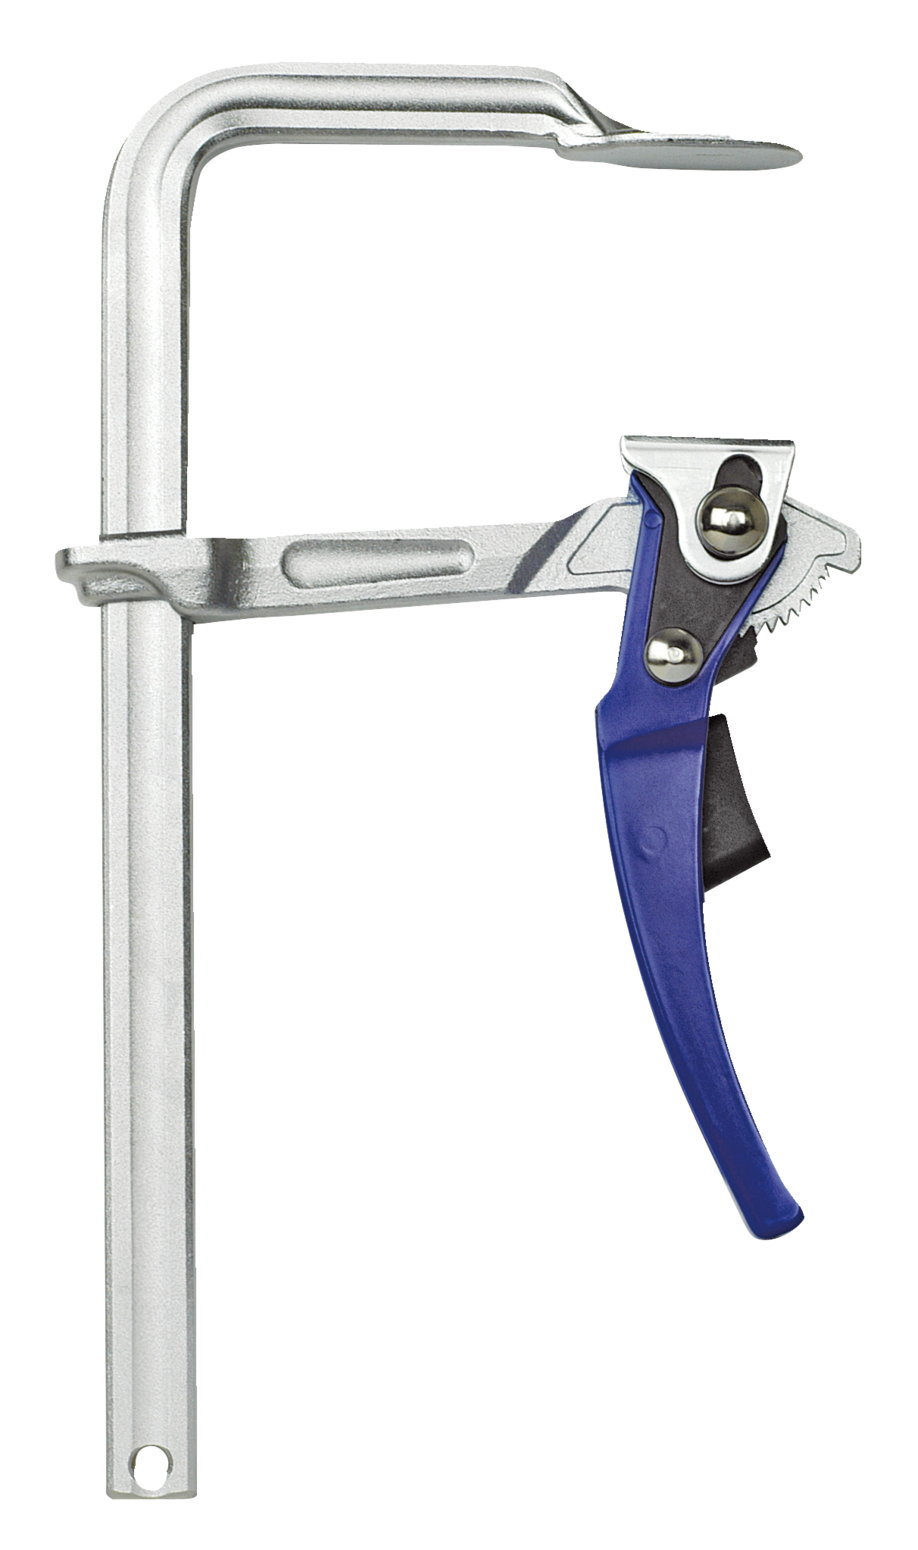 An all-steel VIRIDIS 472 series lever clamp for effortless clamping of multiple workpieces